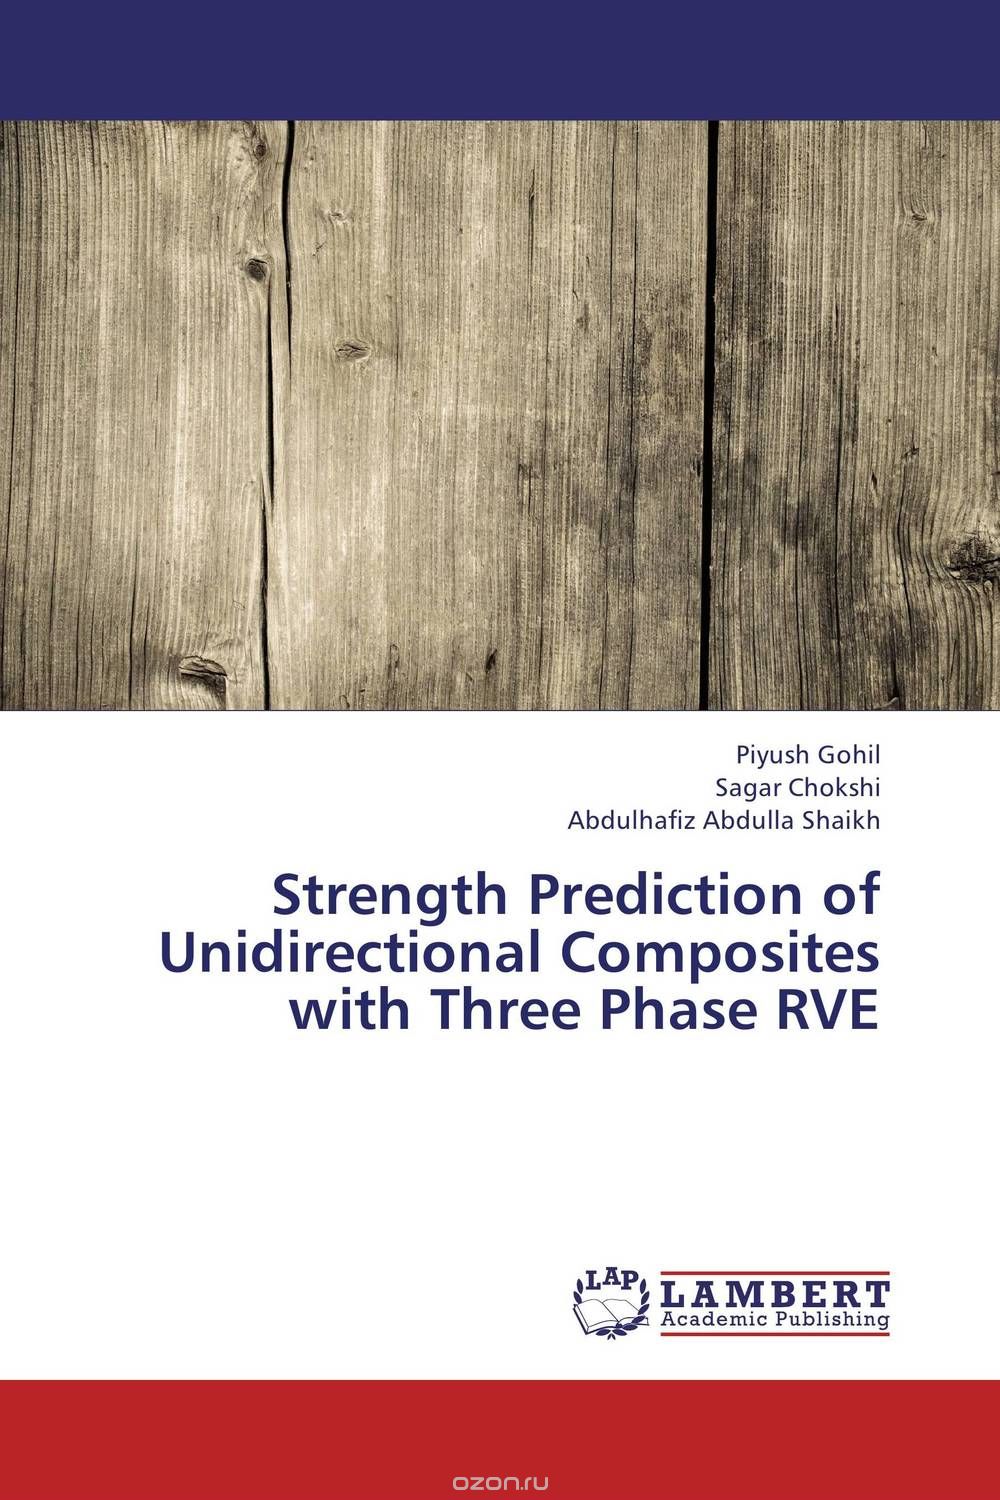 Strength Prediction of Unidirectional Composites with Three Phase RVE